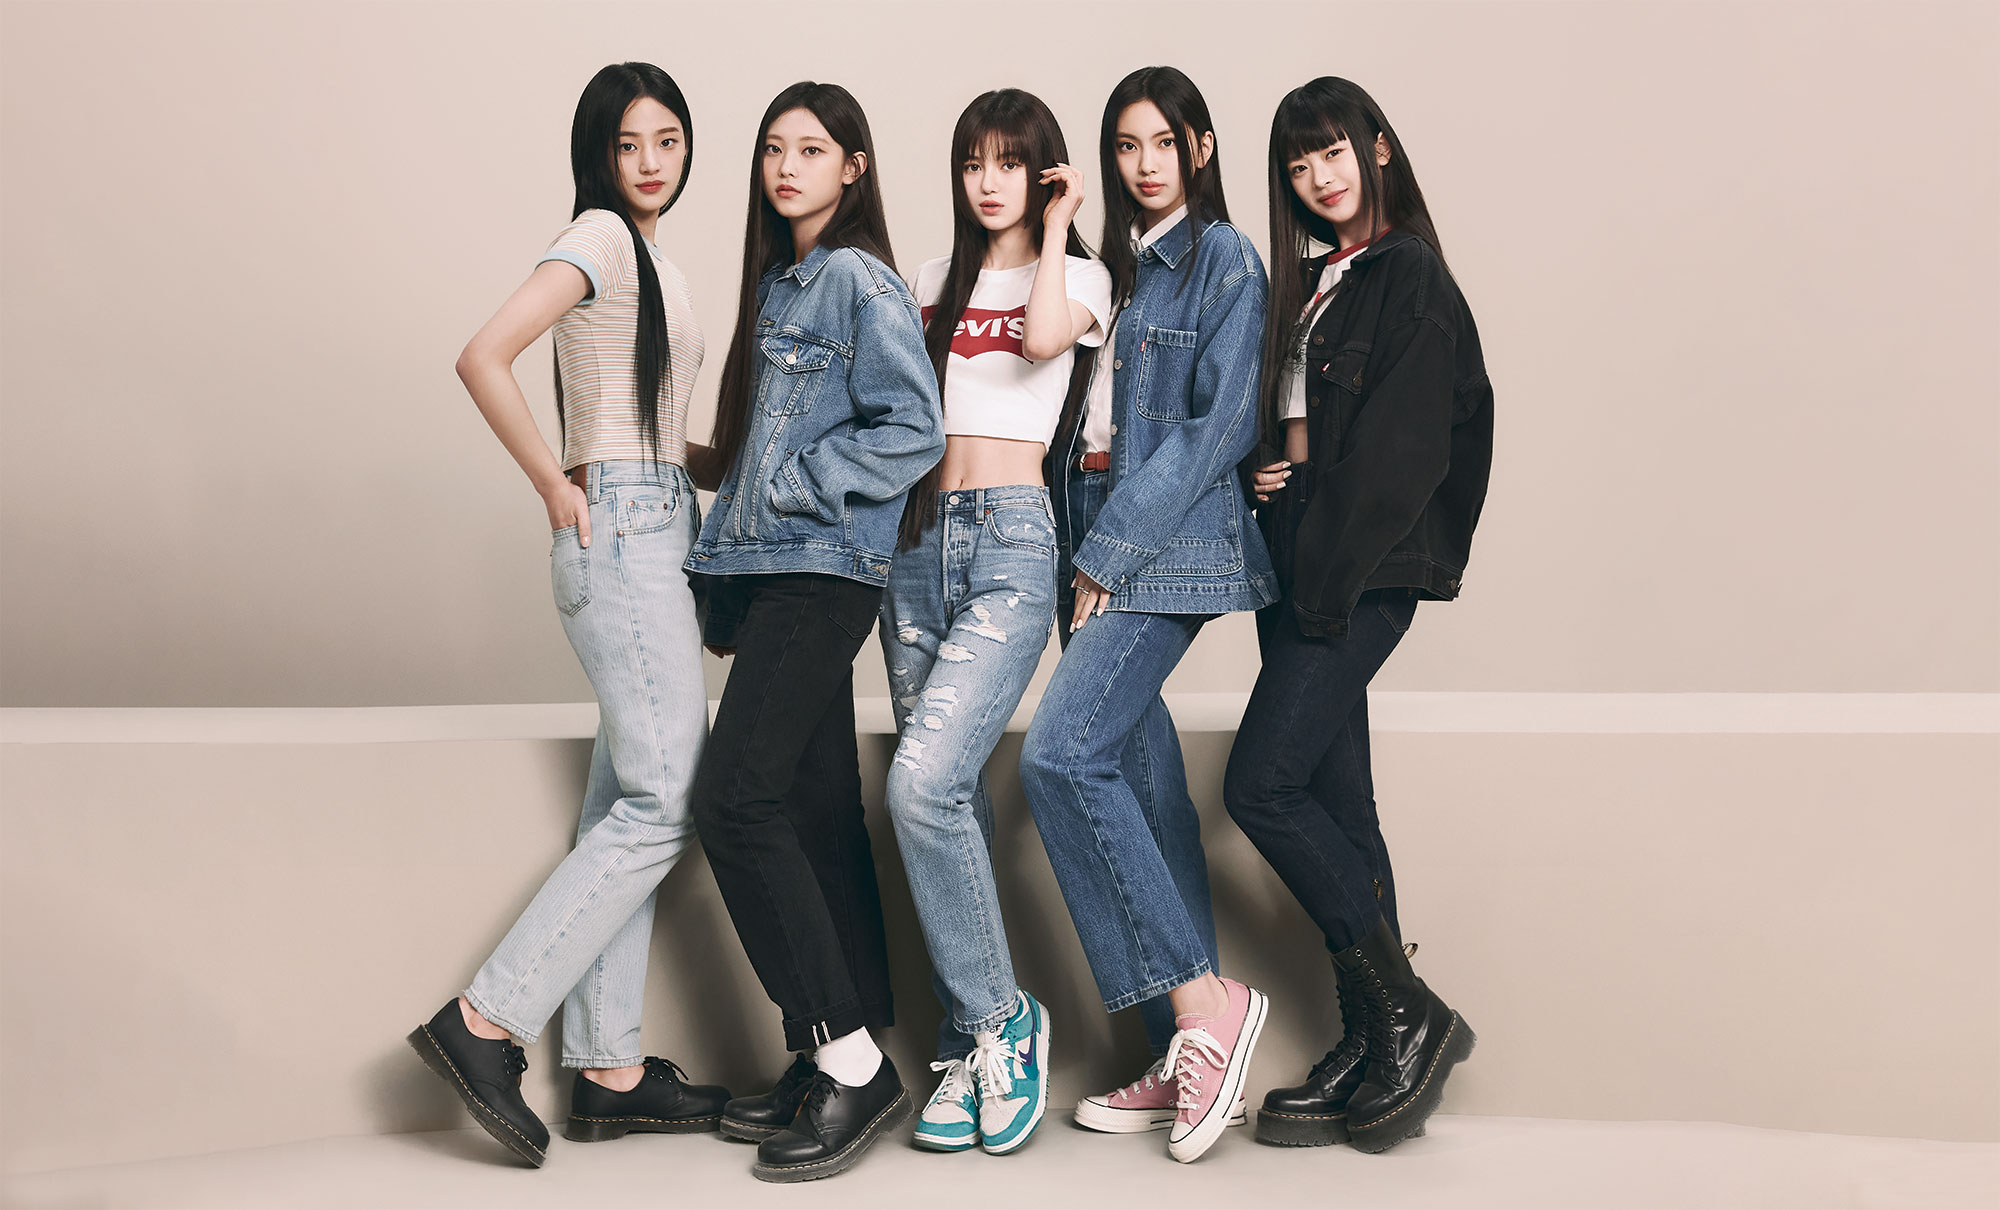 K-pop group New Jeans' company is criticized for controversial concept